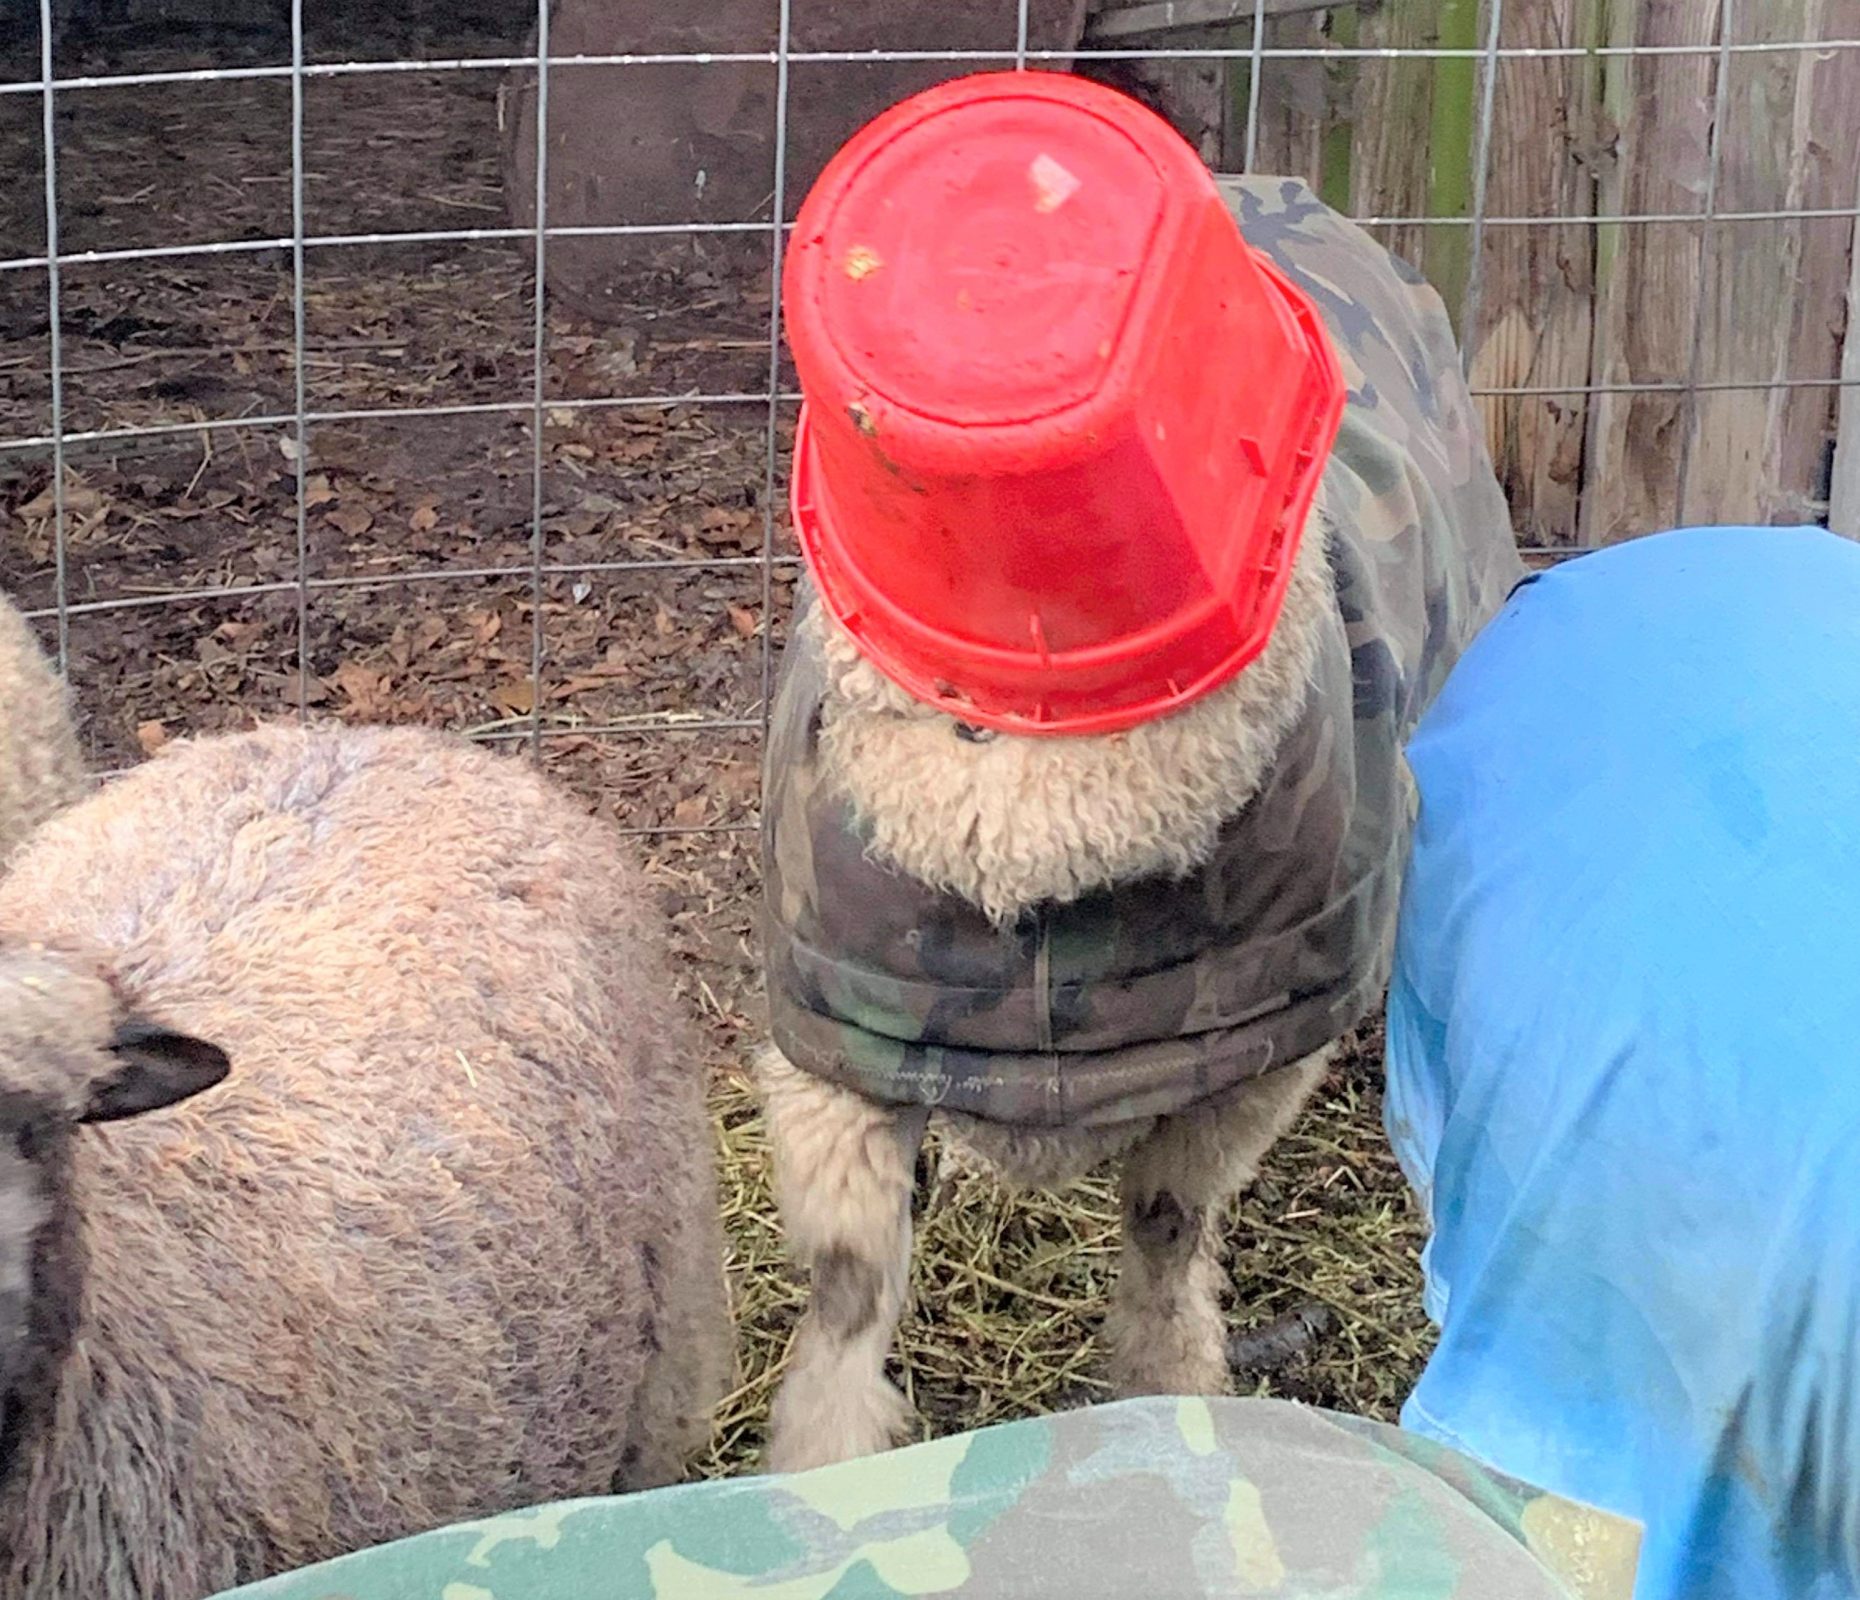 photo of sheep with red bucket covering its head